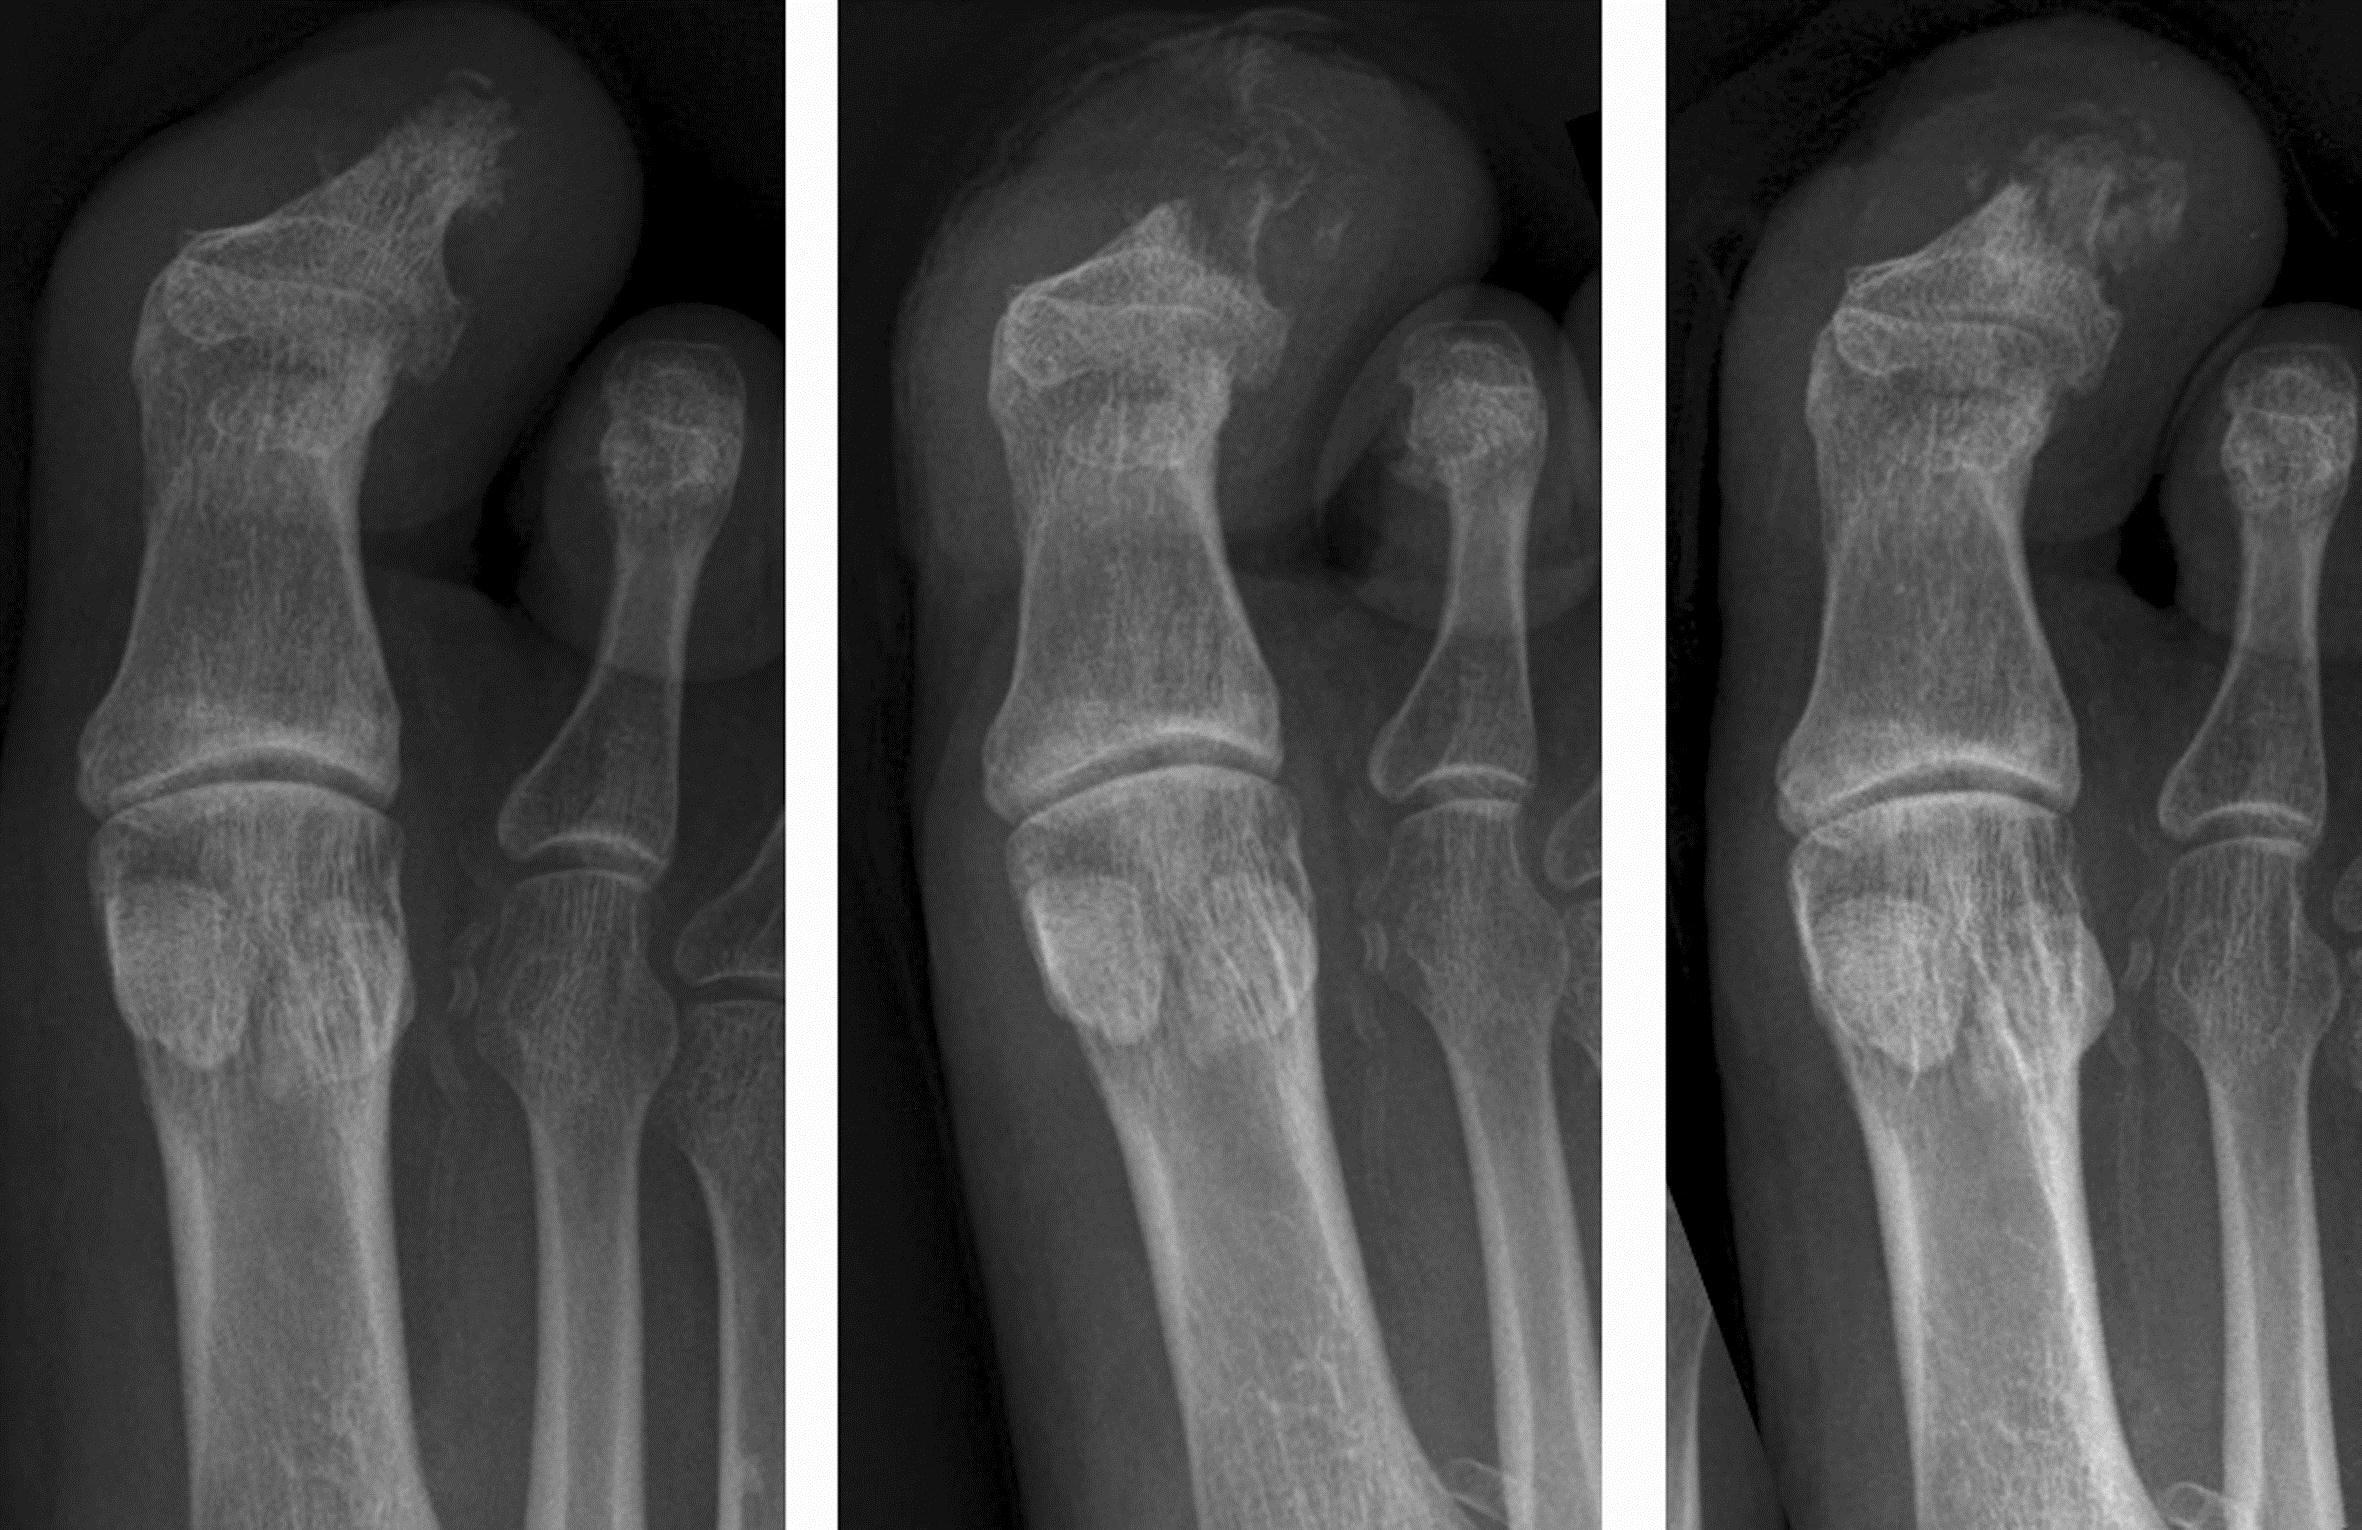 Figure 3. Acute presentation with an ulcer at the tip of the great toe, probing to bone. The terminal phalangeal tuft does show some irregularity (left panel). b) two weeks later there is marked bone demineralisation consistent with osteomyelitis (middle panel). C) After 2 months of treatment there has been partial remineralisation of the bone but with an underlying pathological fracture (right panel).